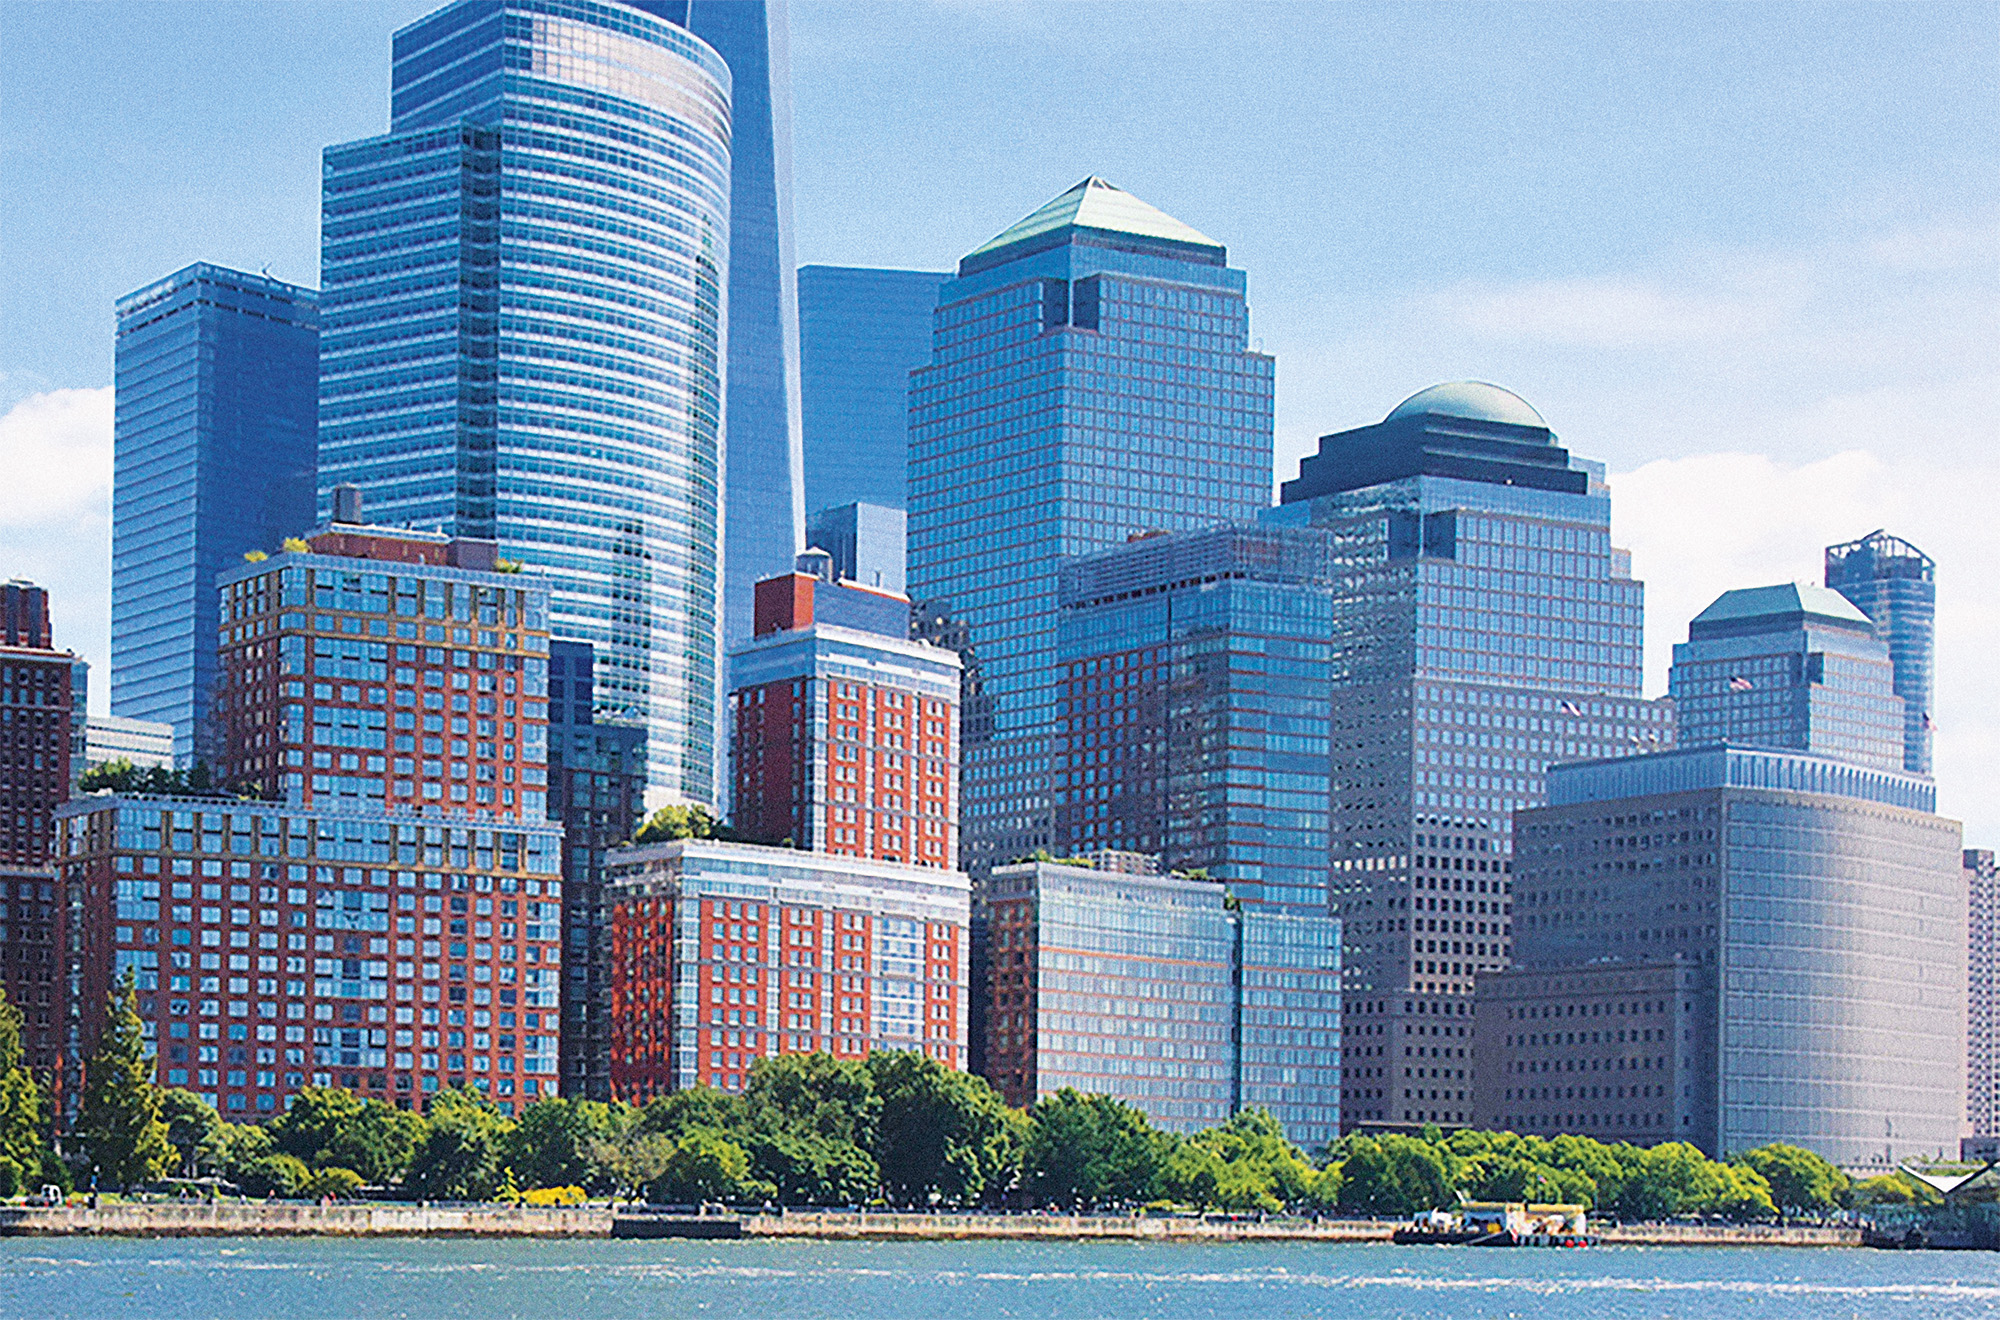 rendering of the shoreline of battery park city in new york city